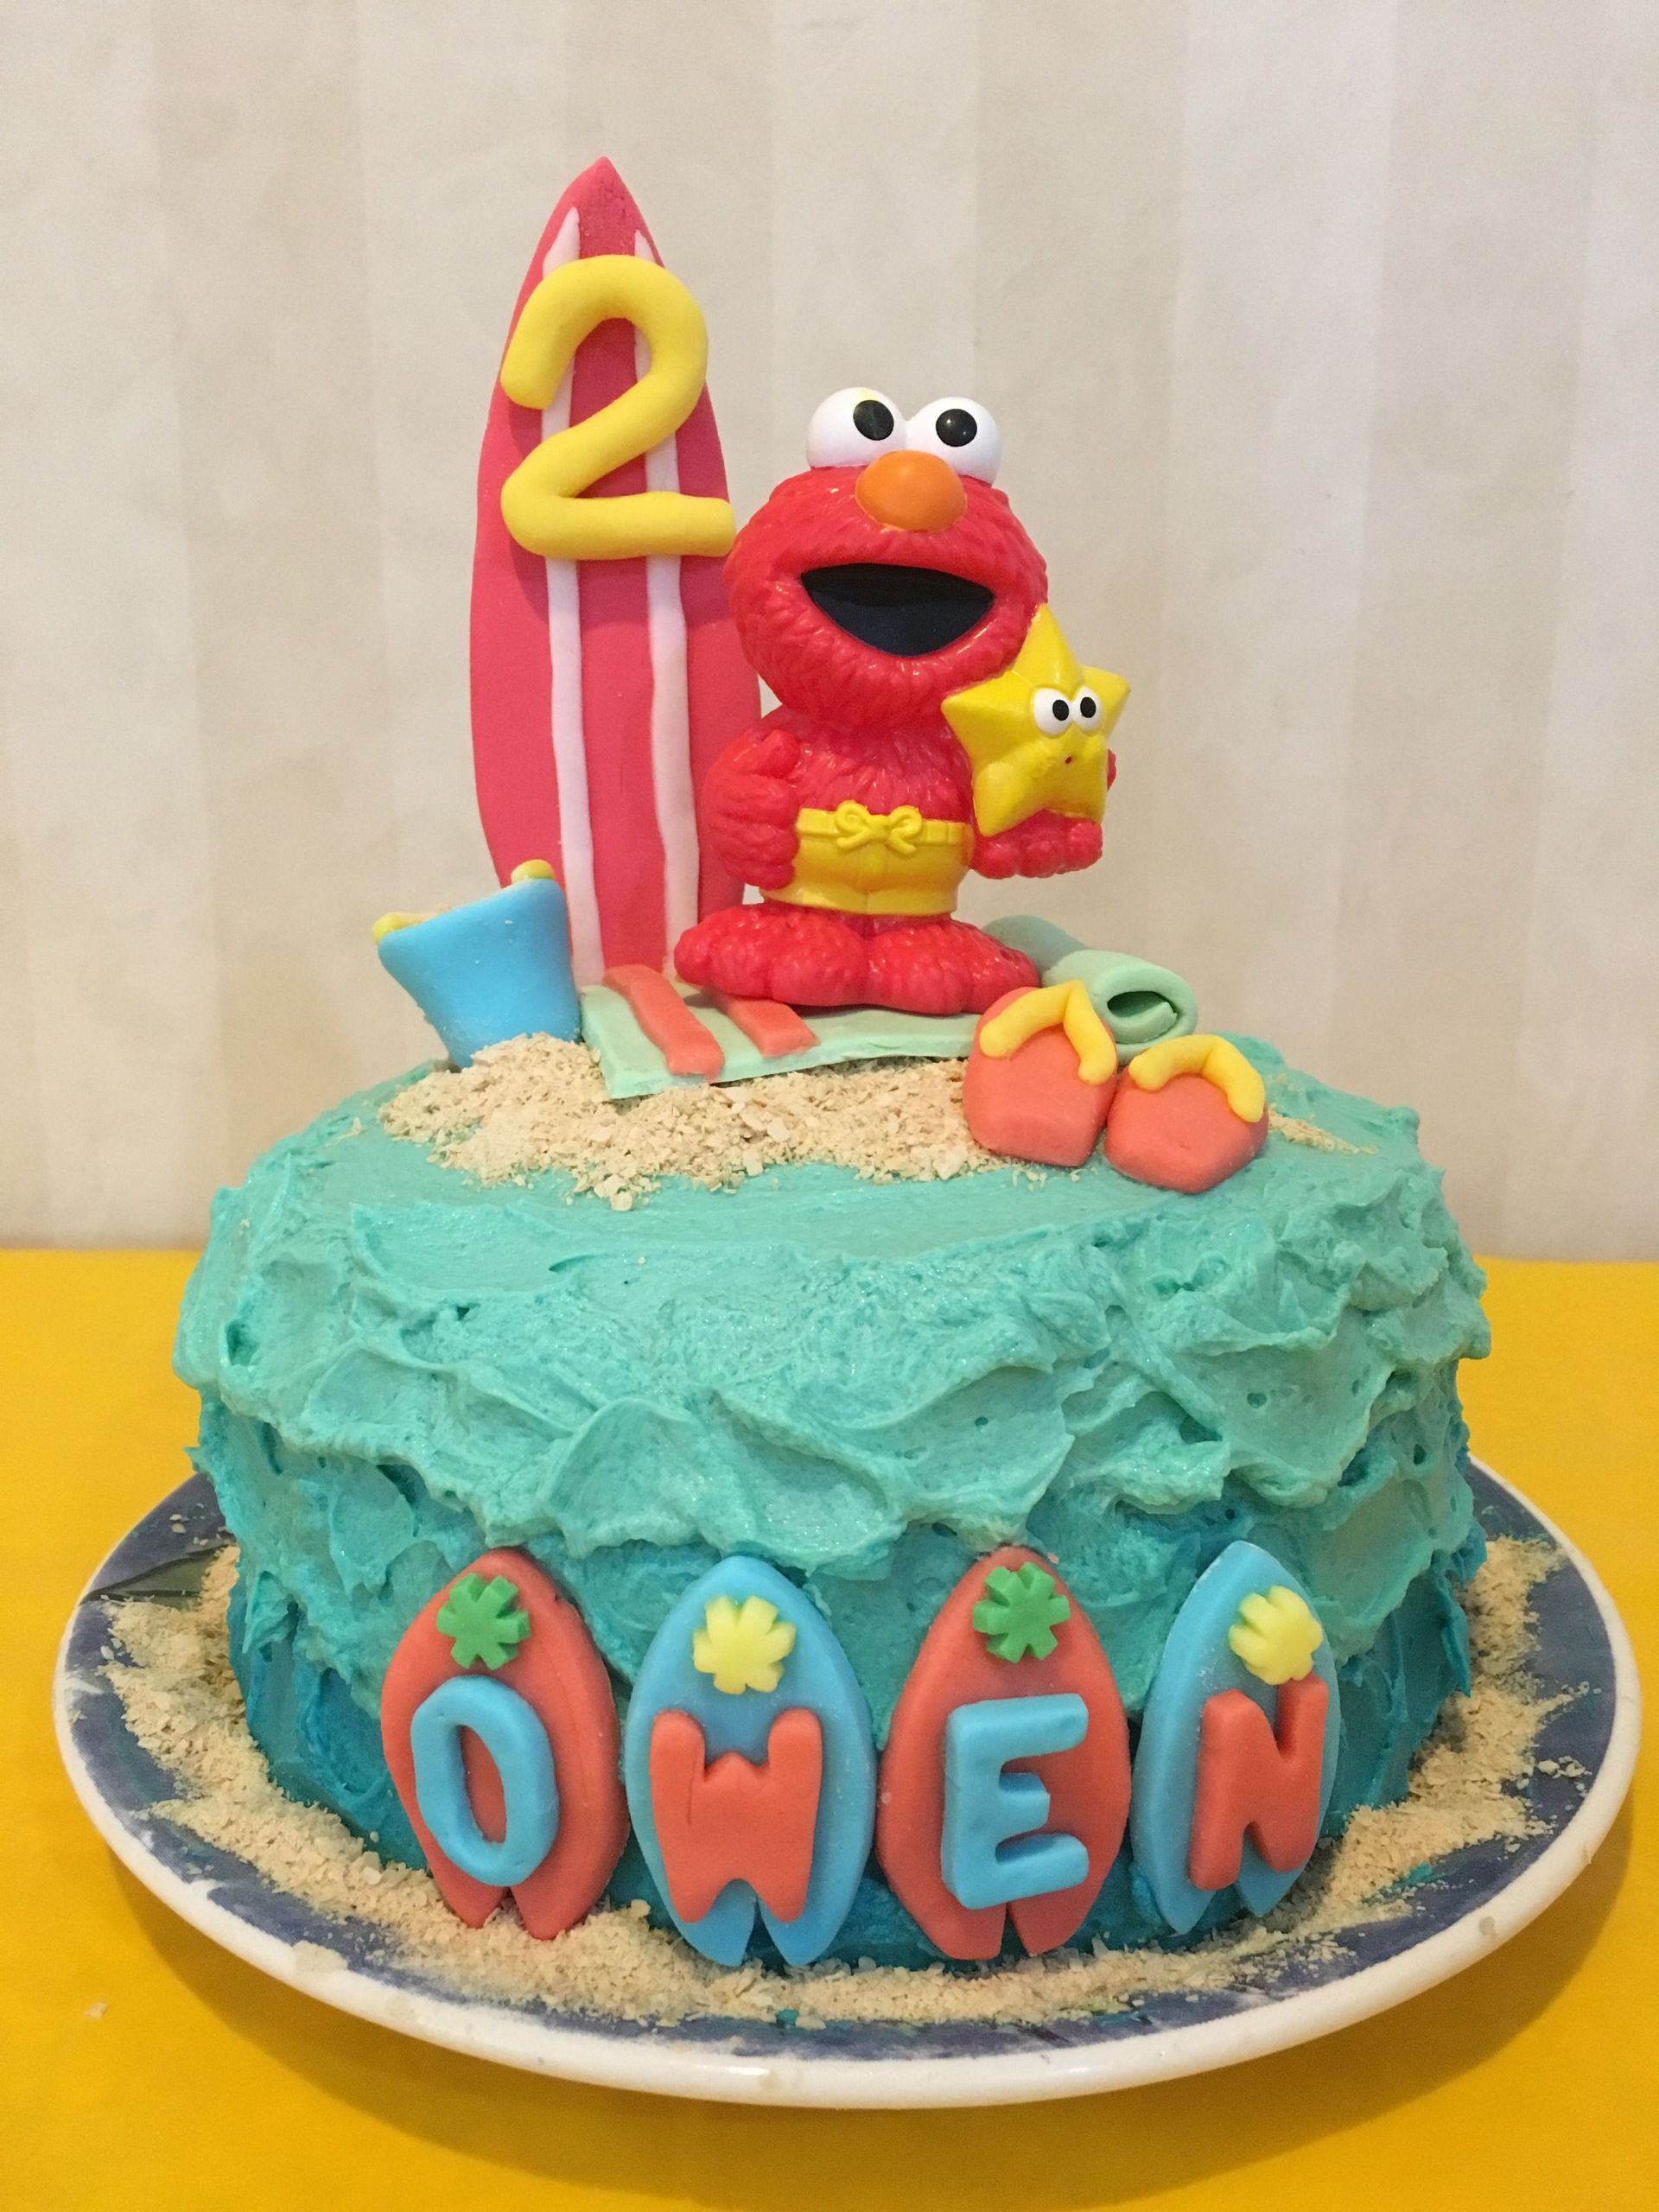 Pool Party Ideas For 2 Year Old
 Elmo beach and surf cake for my 2 year old s birthday